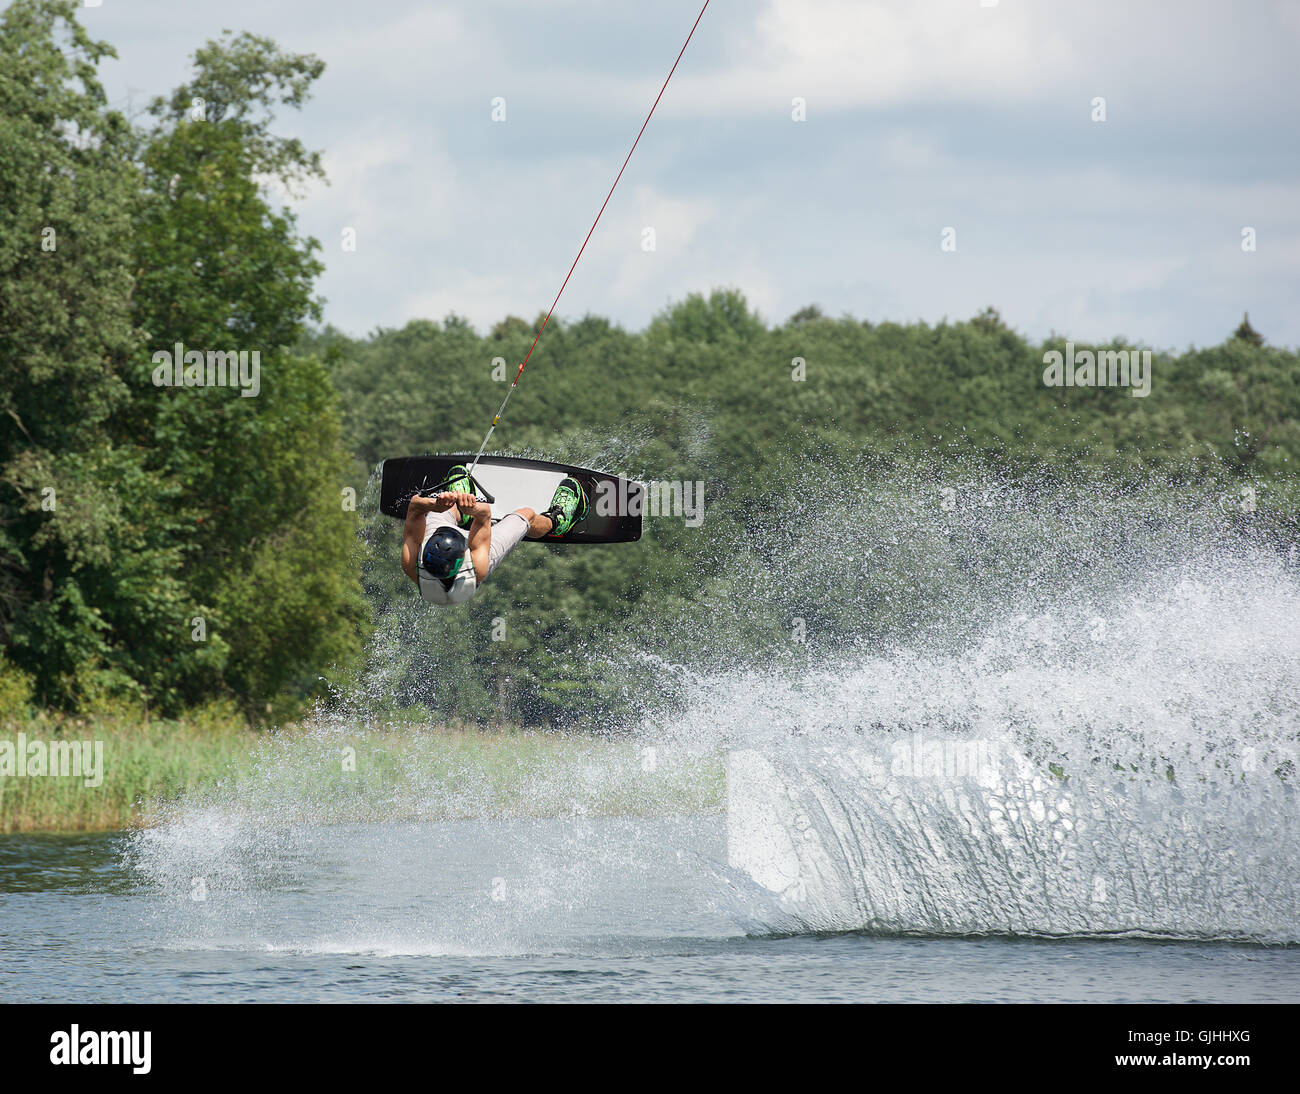 Man wakeboarding on a lake, Lithuania Stock Photo